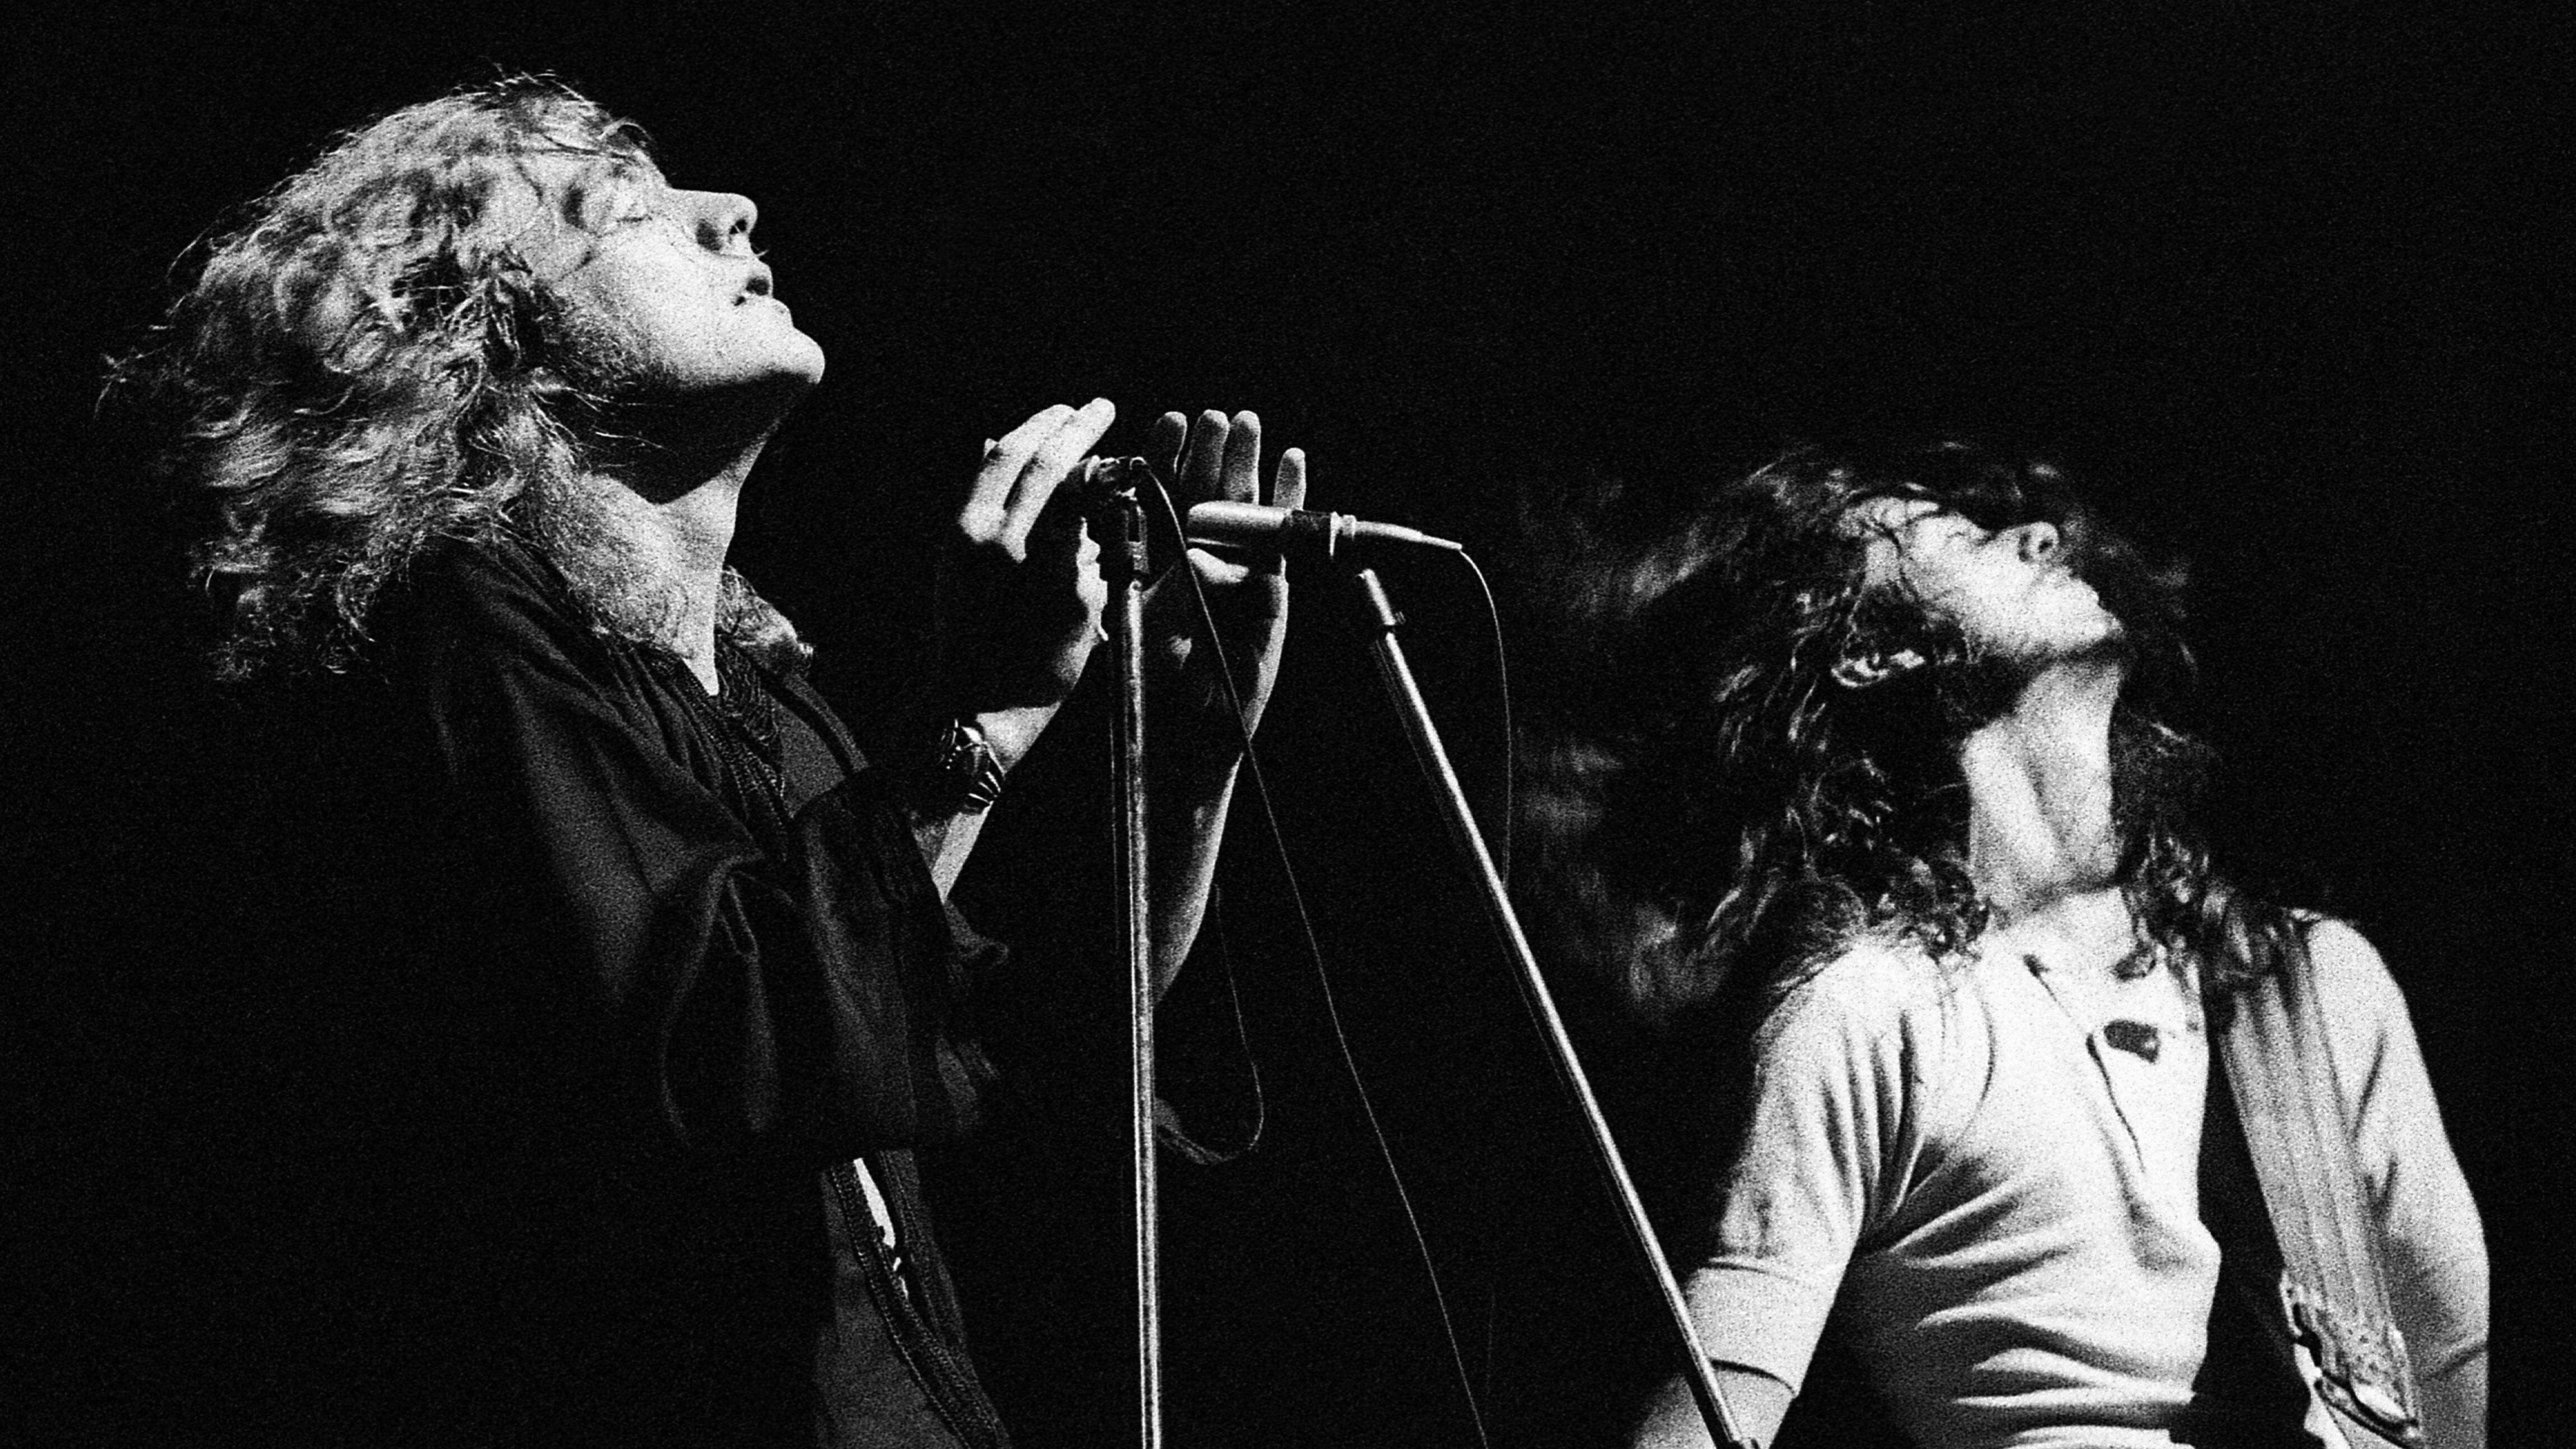 Whole Lotta Love — Led Zeppelin S Priapic Classic Has A Tangled History